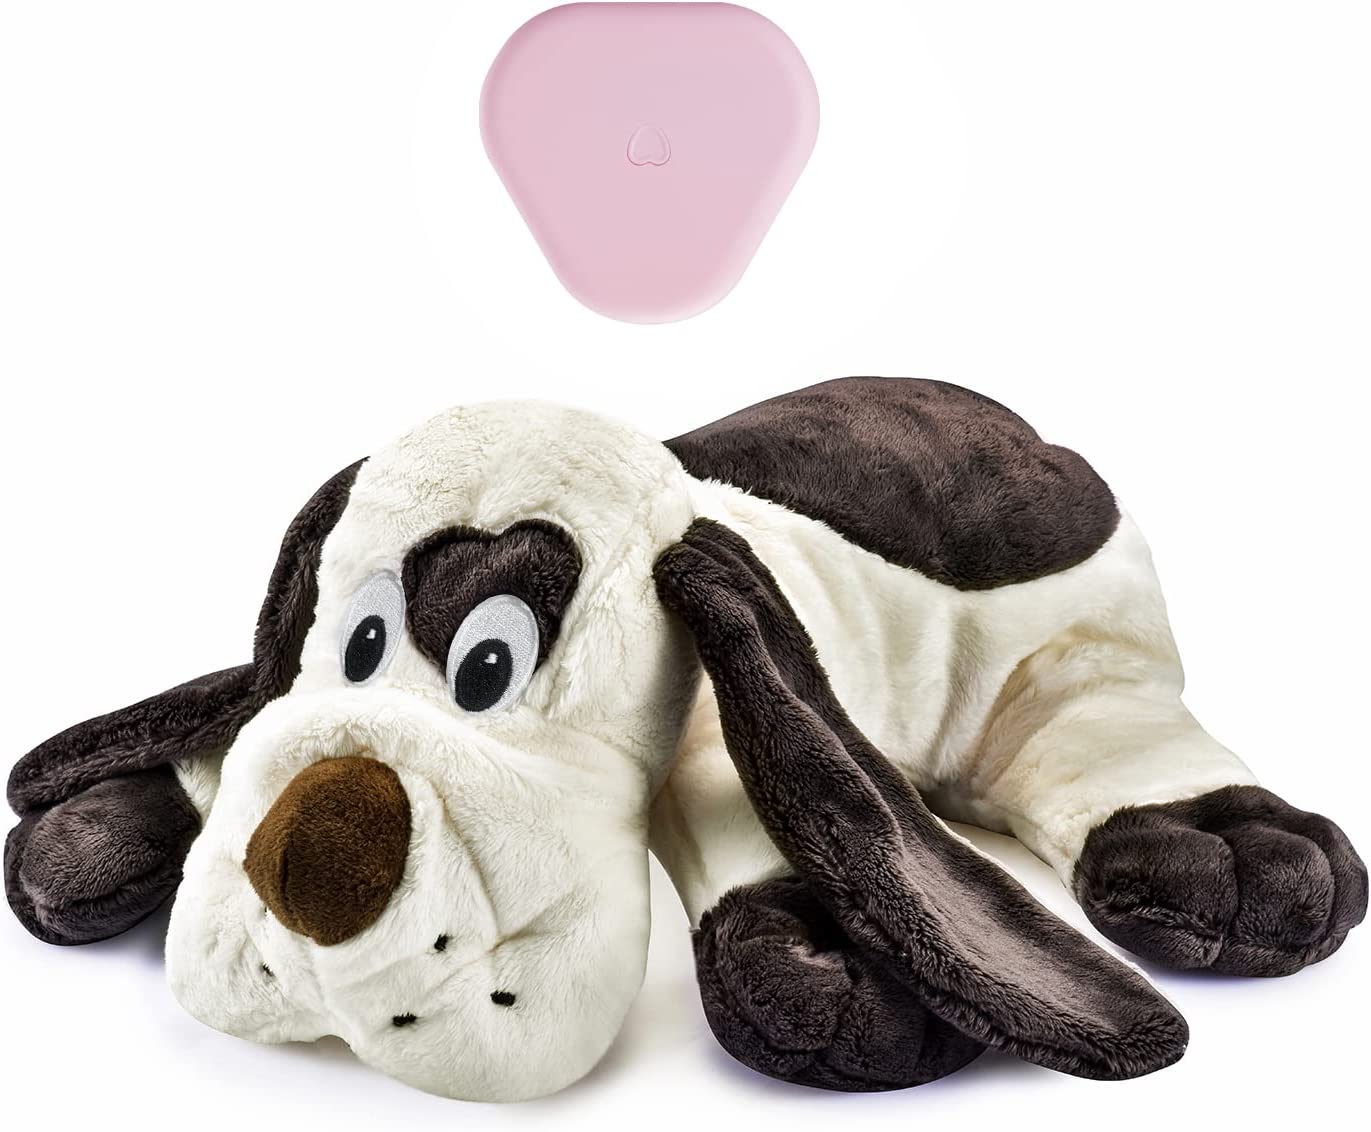 9. Moropaky Puppy Heartbeat Toy voor verlatingsangst